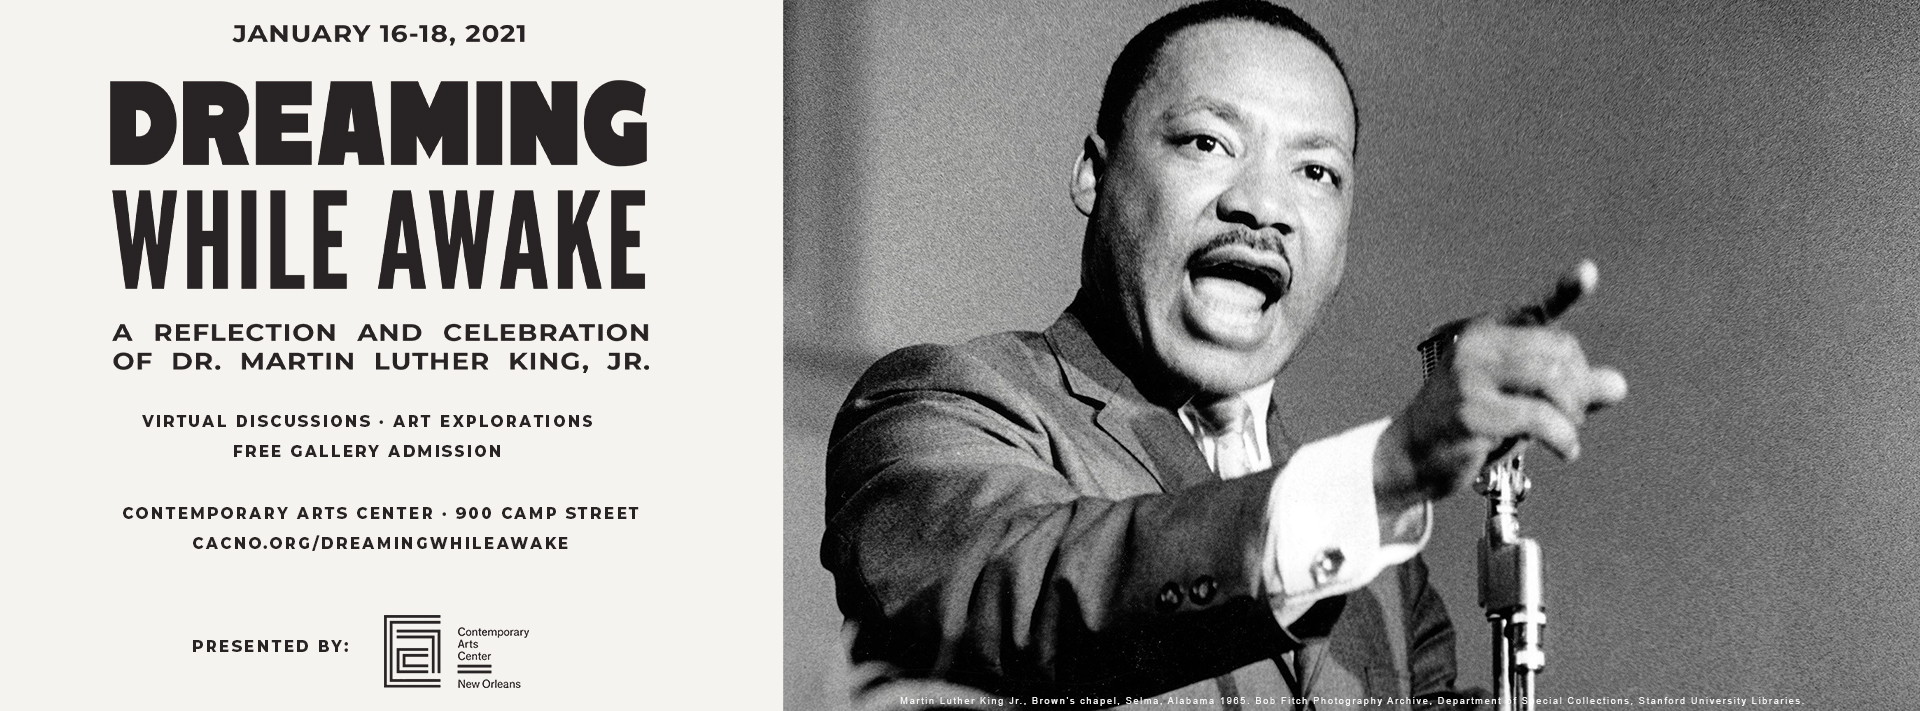 Dreaming While Awake: A Celebration and Reflection of Dr. Martin Luther King, Jr.